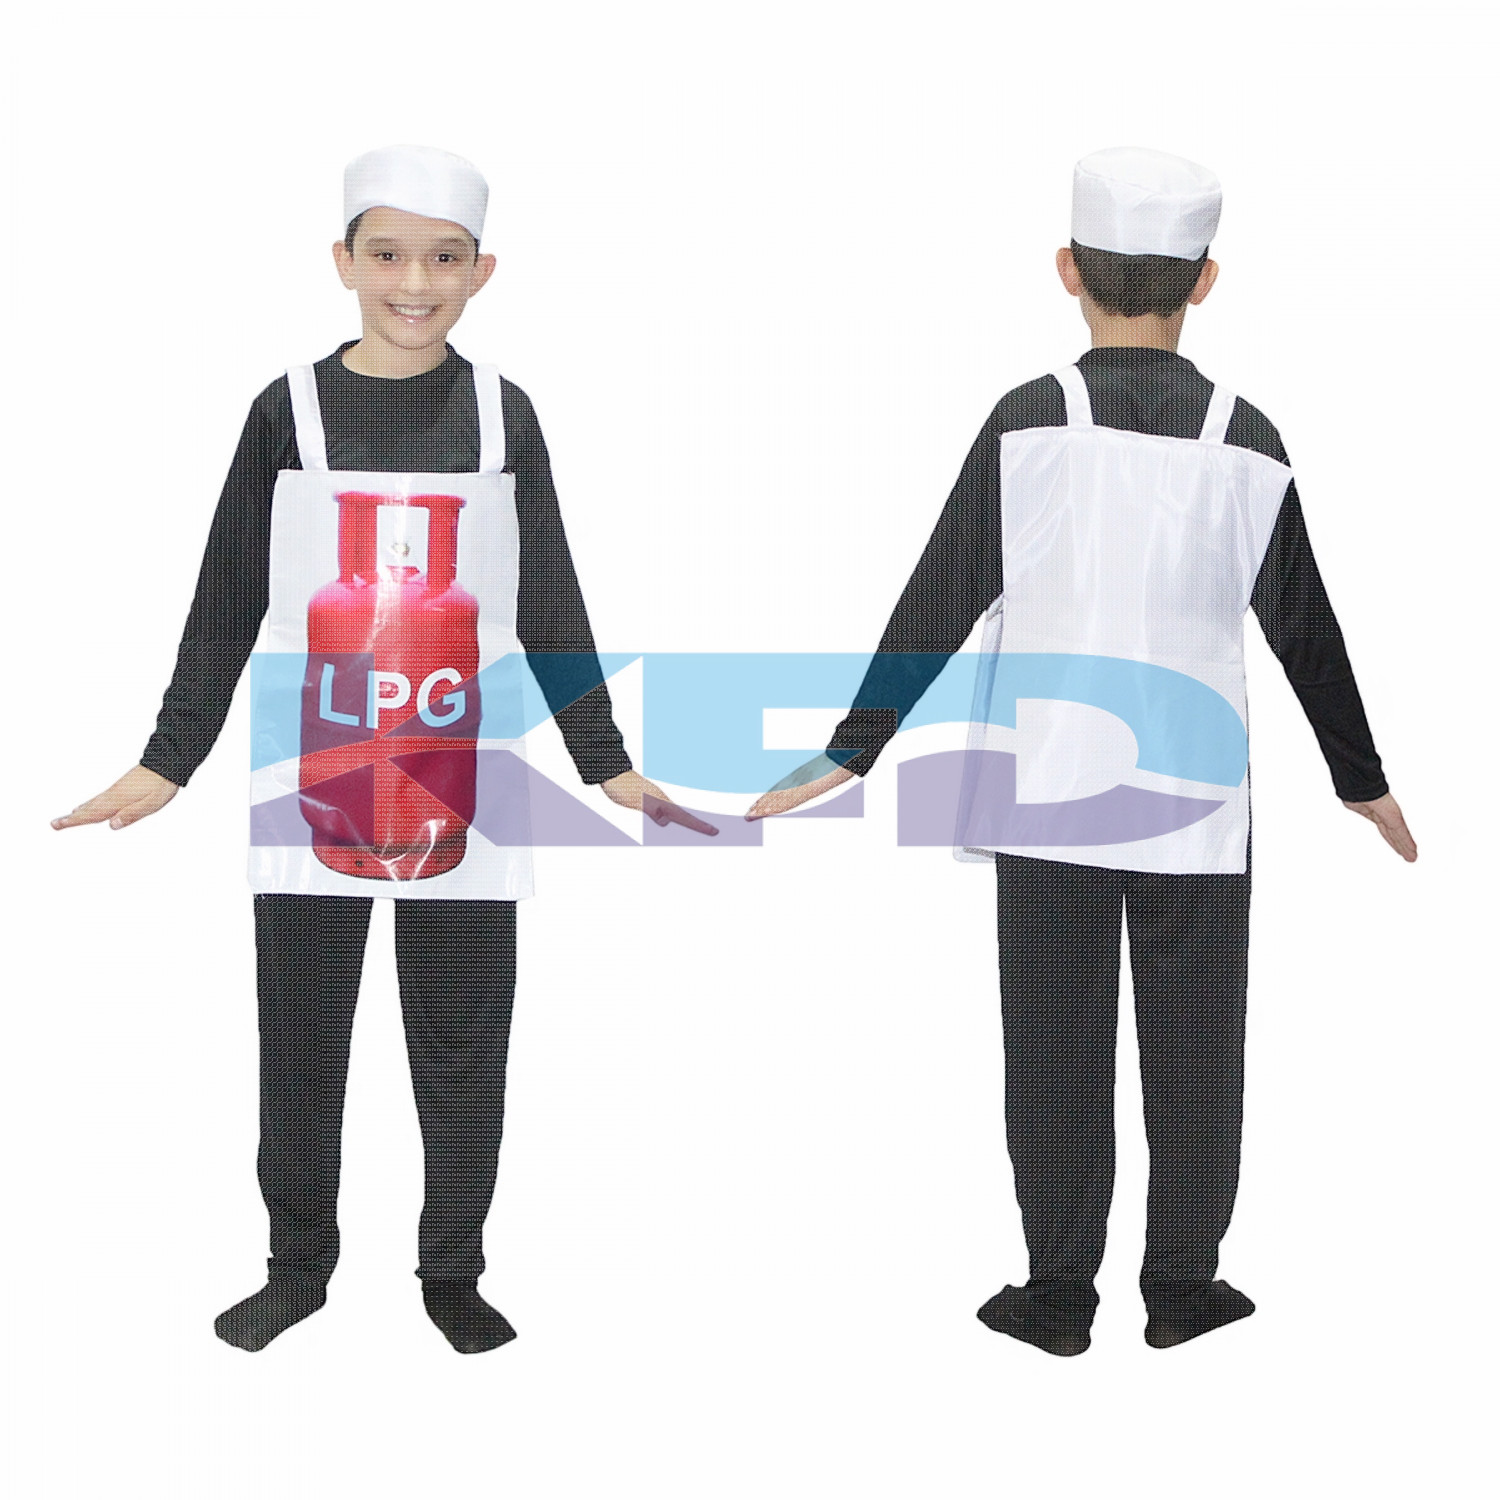 LPG Gas Cylinder Costume For Kids/Object Fancy Dress For Kids/For Kids Annual function/Theme Party/Competition/Stage Shows/Birthday Party Dress